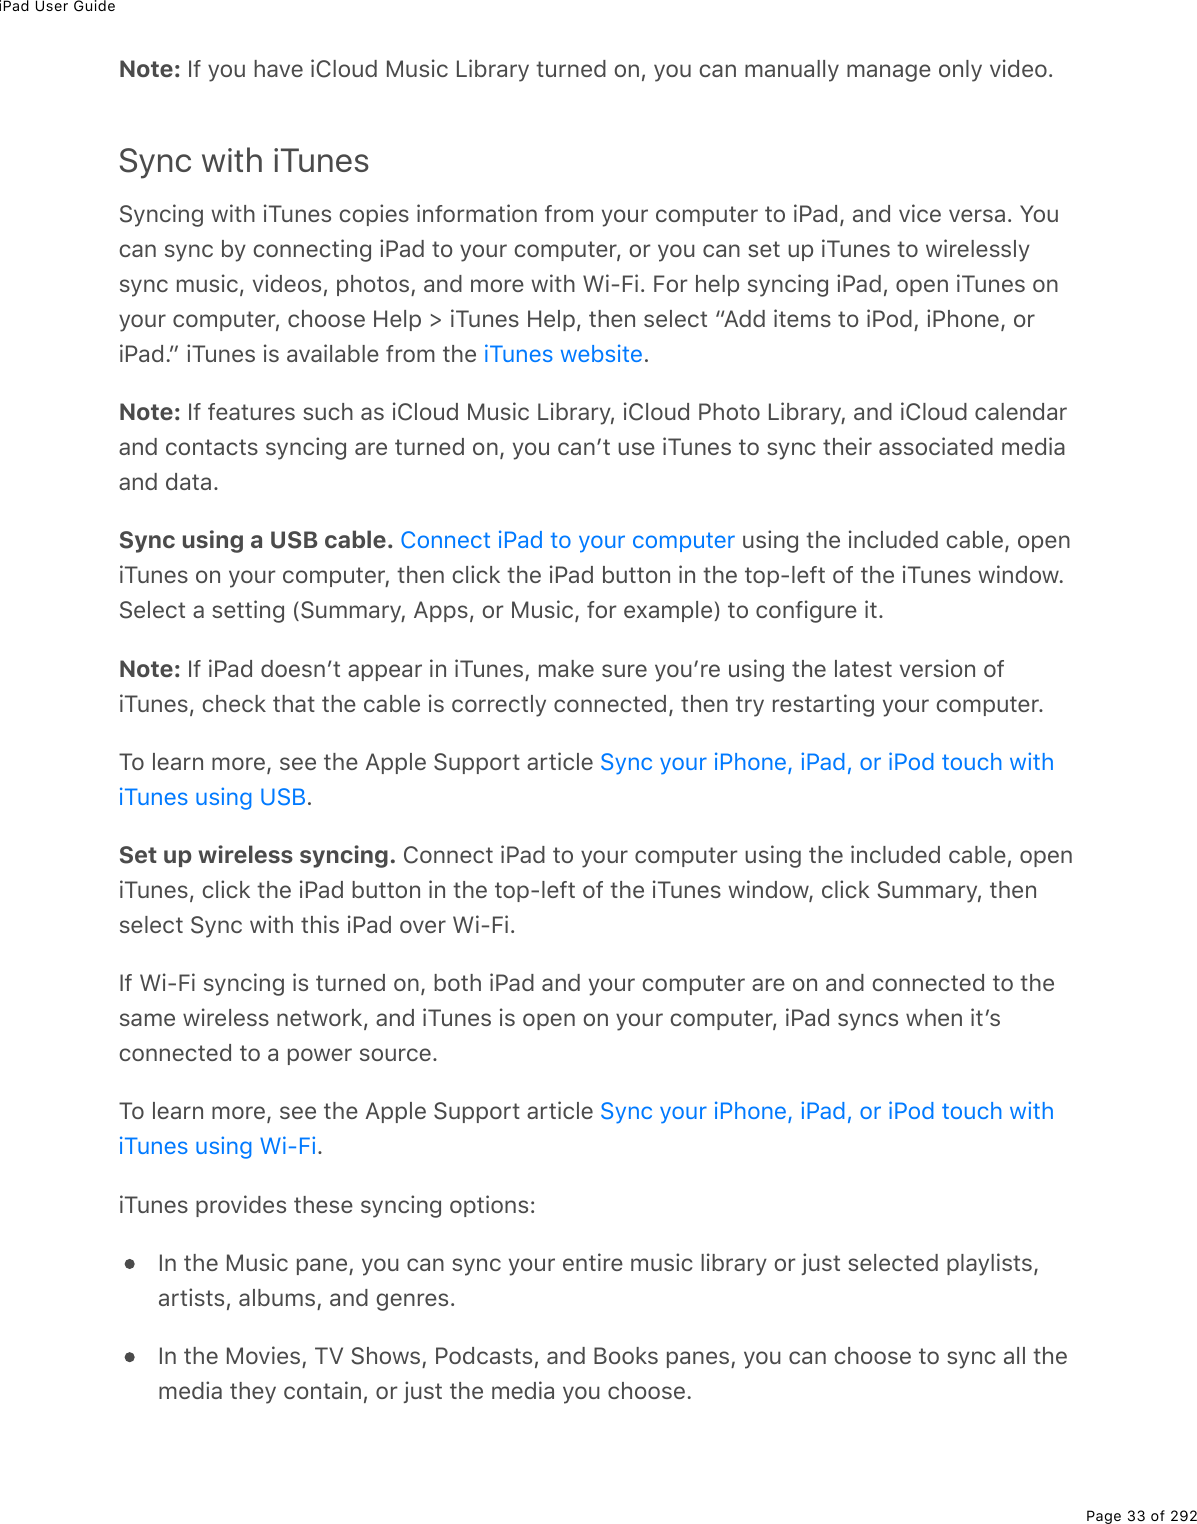 iPad User GuidePage 33 of 292Note: If you have iCloud Music Library turned on, you can manually manage only video.Sync with iTunesSyncing with iTunes copies information from your computer to iPad, and vice versa. Youcan sync by connecting iPad to your computer, or you can set up iTunes to wirelesslysync music, videos, photos, and more with Wi-Fi. For help syncing iPad, open iTunes onyour computer, choose Help &gt; iTunes Help, then select “Add items to iPod, iPhone, oriPad.” iTunes is available from the  .Note: If features such as iCloud Music Library, iCloud Photo Library, and iCloud calendarand contacts syncing are turned on, you canʼt use iTunes to sync their associated mediaand data.Sync using a USB cable.   using the included cable, openiTunes on your computer, then click the iPad button in the top-left of the iTunes window.Select a setting (Summary, Apps, or Music, for example) to configure it.Note: If iPad doesnʼt appear in iTunes, make sure youʼre using the latest version ofiTunes, check that the cable is correctly connected, then try restarting your computer.To learn more, see the Apple Support article .Set up wireless syncing. Connect iPad to your computer using the included cable, openiTunes, click the iPad button in the top-left of the iTunes window, click Summary, thenselect Sync with this iPad over Wi-Fi.If Wi-Fi syncing is turned on, both iPad and your computer are on and connected to thesame wireless network, and iTunes is open on your computer, iPad syncs when itʼsconnected to a power source.To learn more, see the Apple Support article .iTunes provides these syncing options:In the Music pane, you can sync your entire music library or just selected playlists,artists, albums, and genres.In the Movies, TV Shows, Podcasts, and Books panes, you can choose to sync all themedia they contain, or just the media you choose.iTunes websiteConnect iPad to your computerSync your iPhone, iPad, or iPod touch withiTunes using USBSync your iPhone, iPad, or iPod touch withiTunes using Wi-Fi